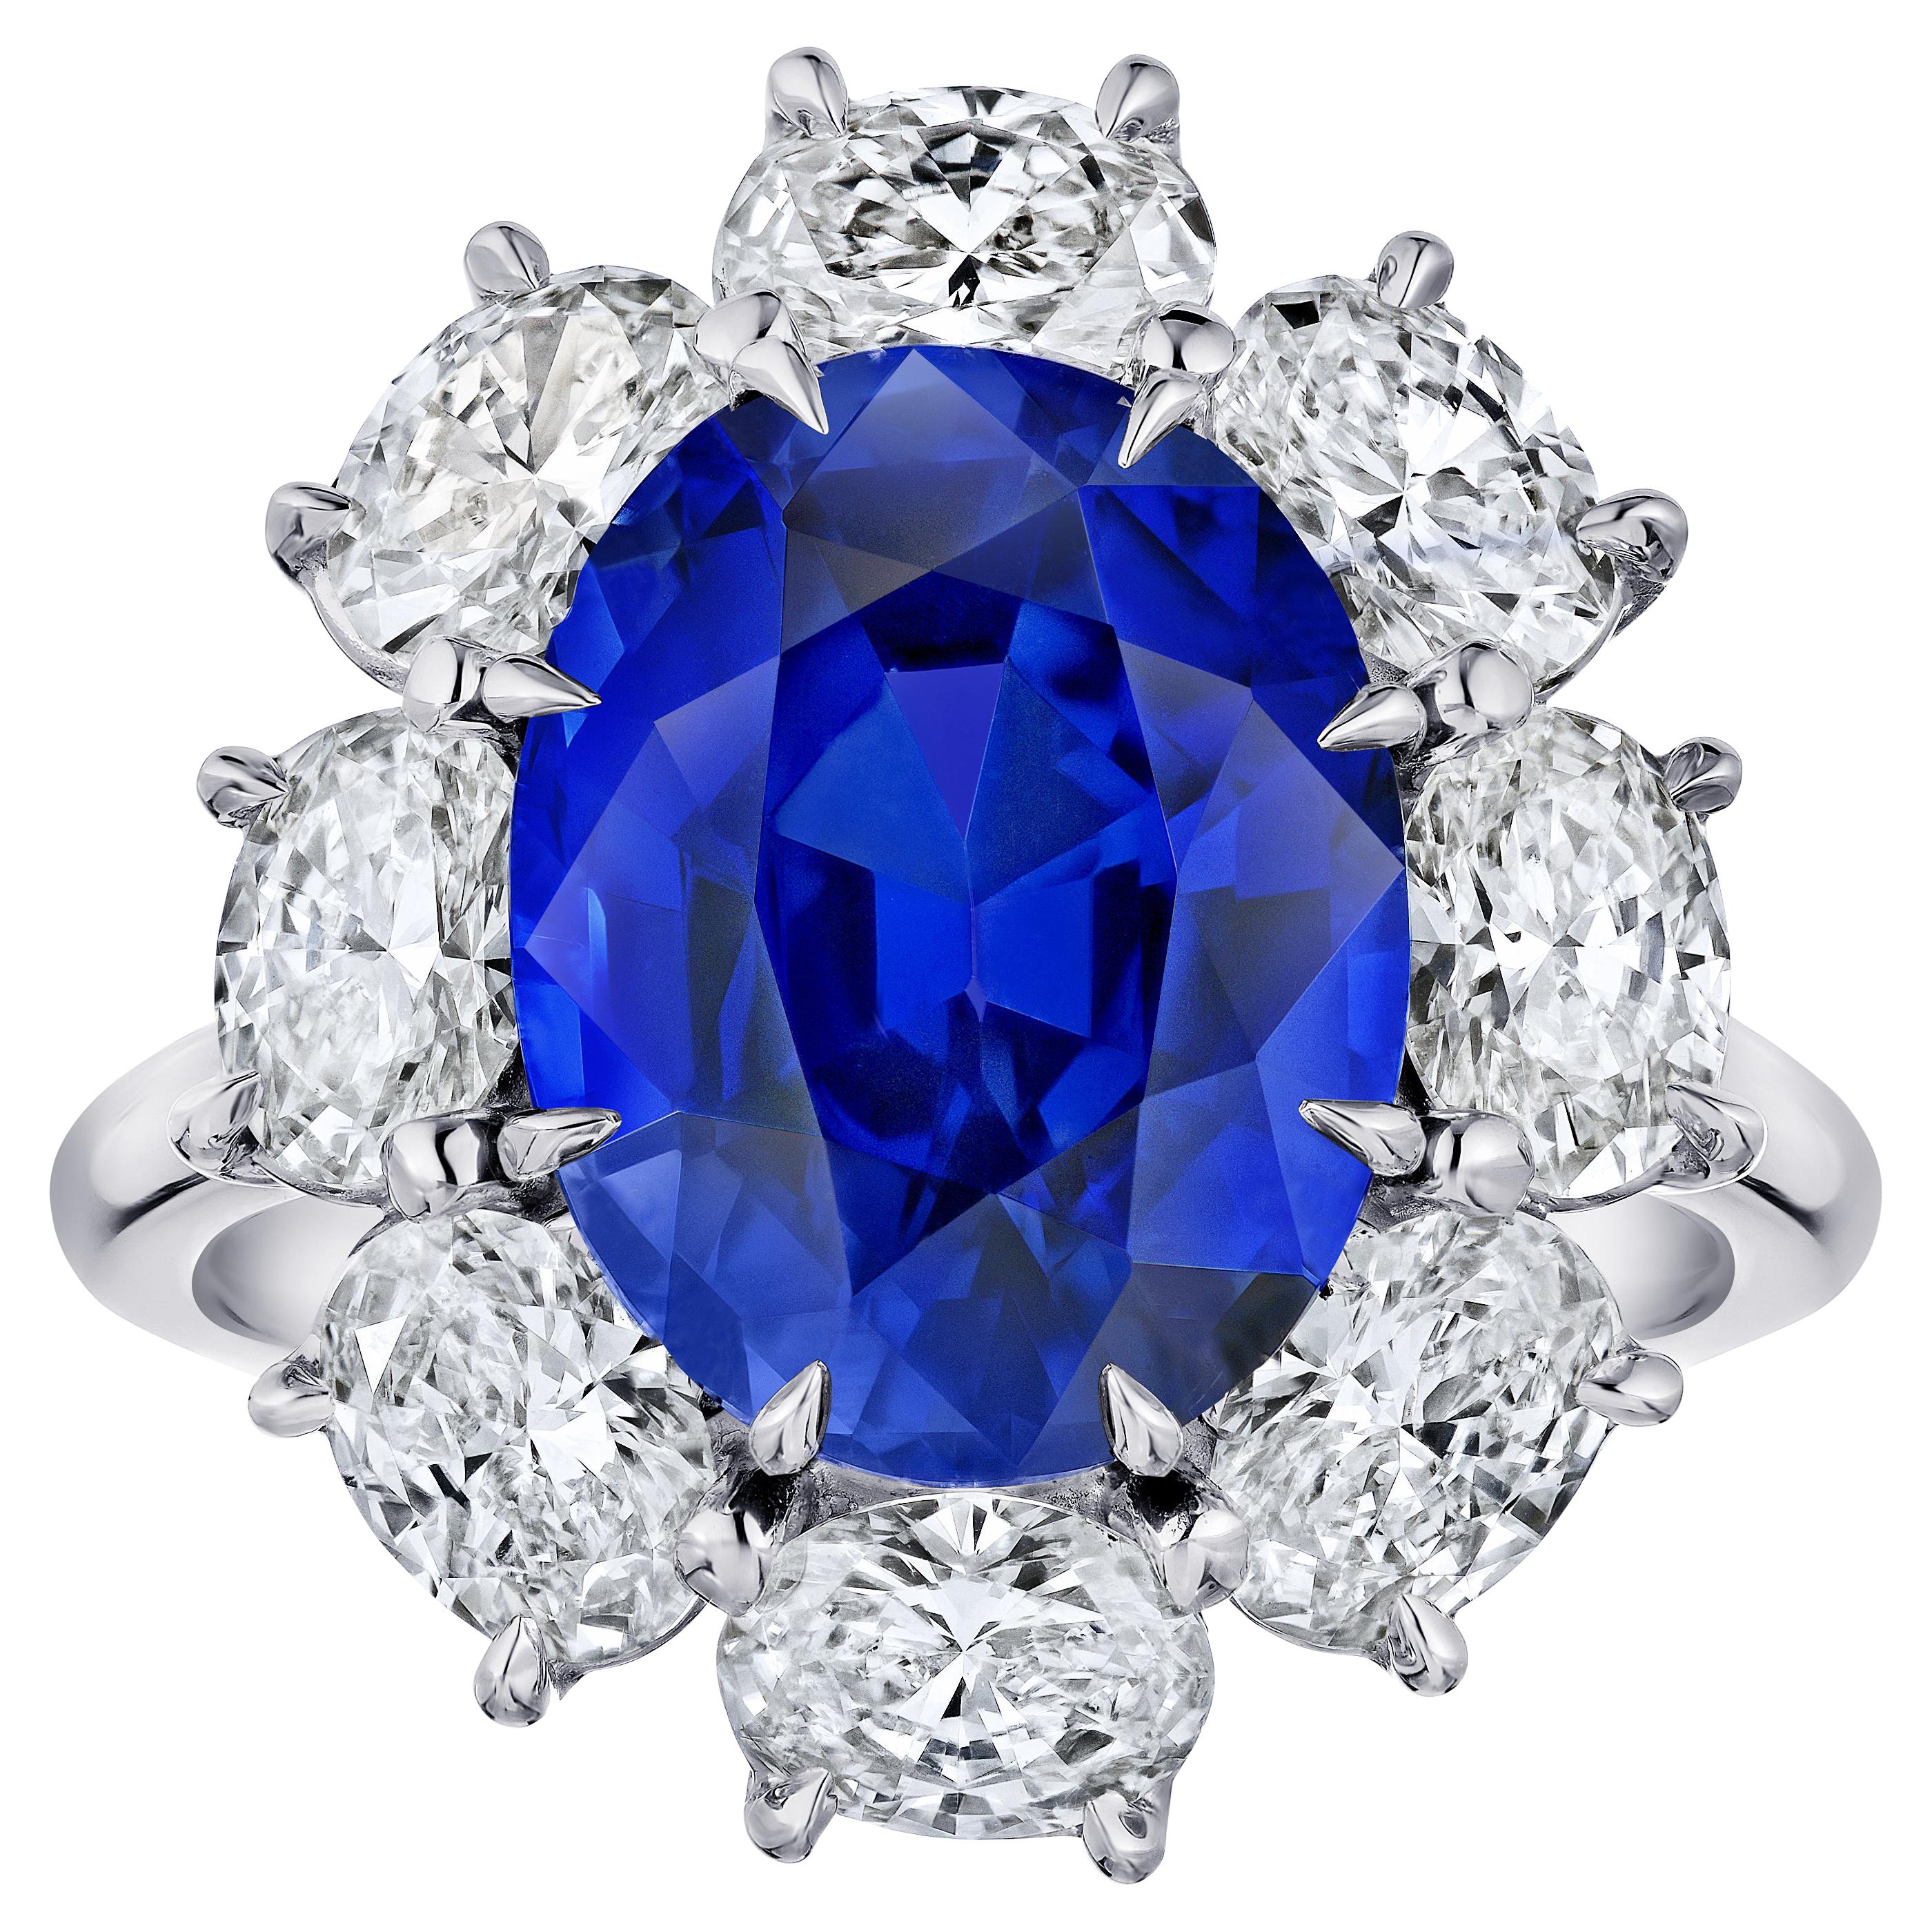 “Diana” Spaced Oval Halo Six Carat Blue Oval Sapphire Platinum Ring